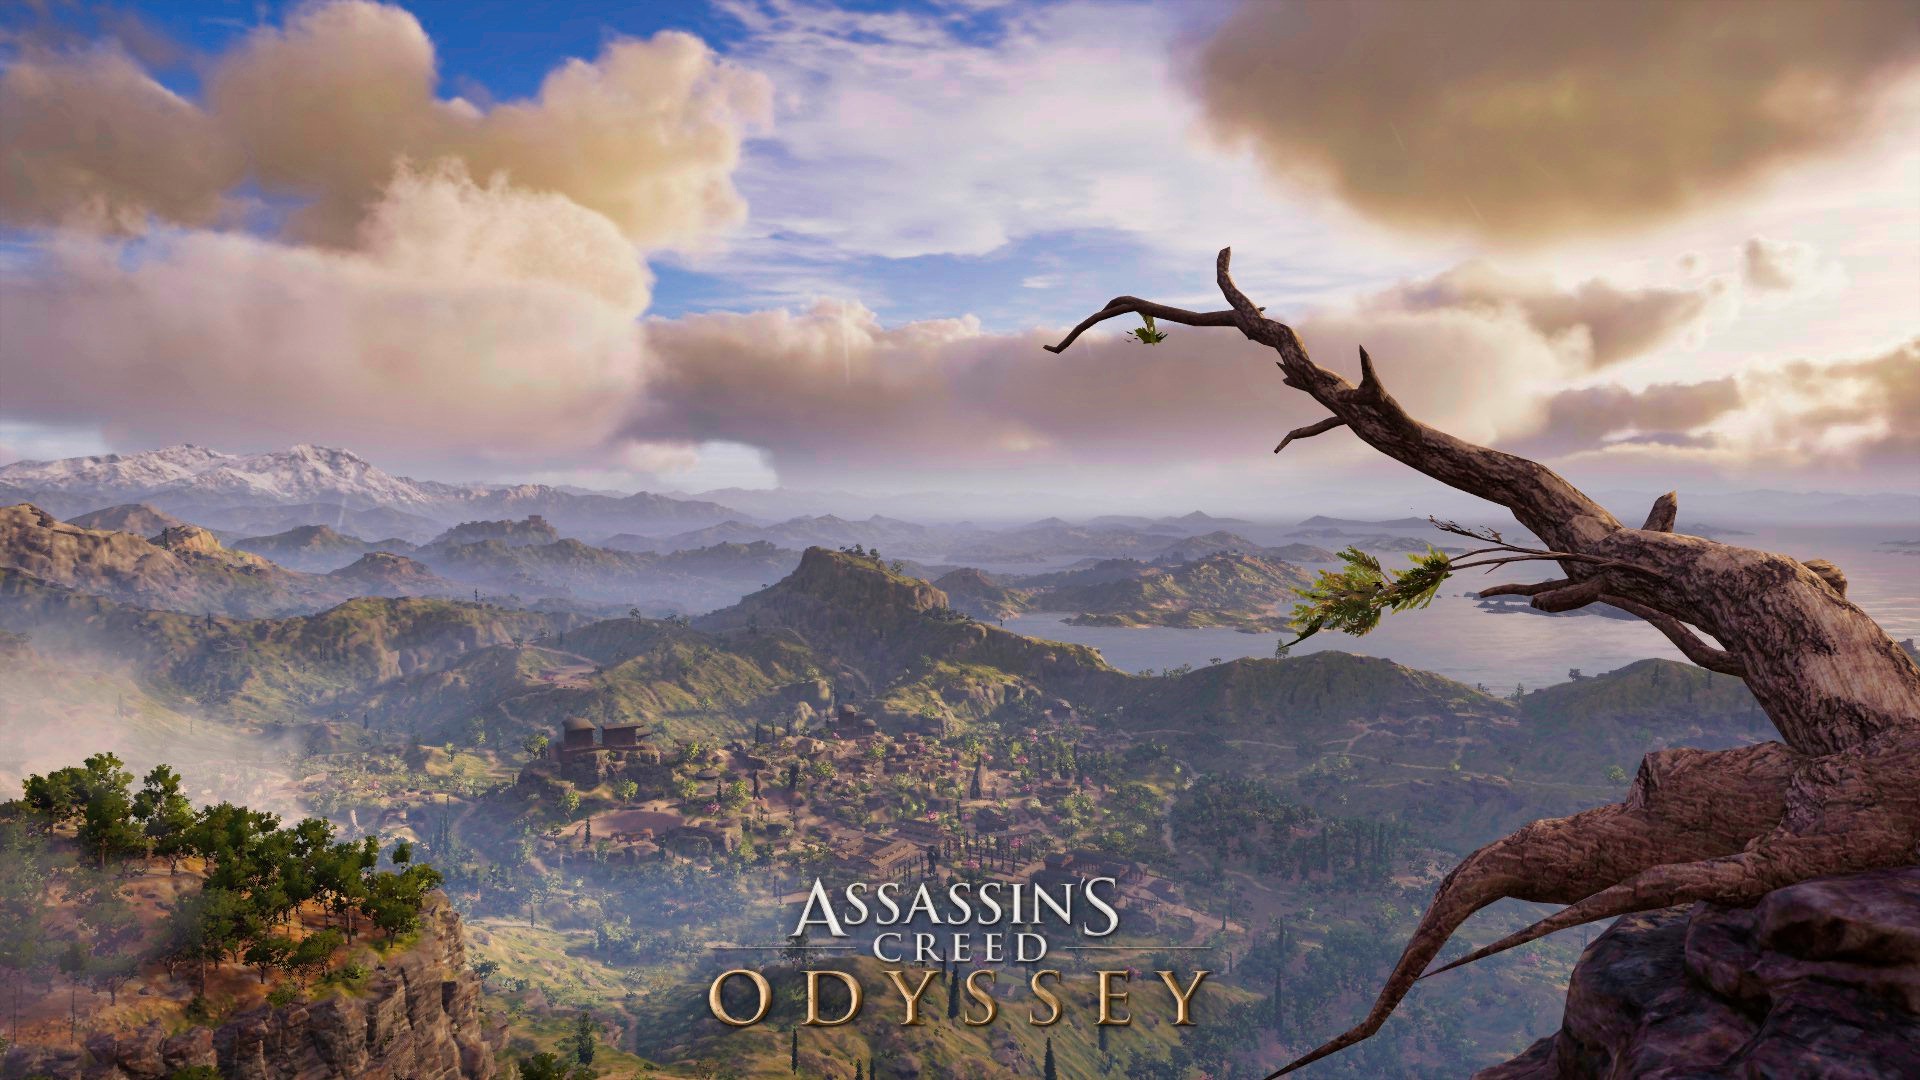 Assassin's Creed Odyssey HD Wallpaper by .